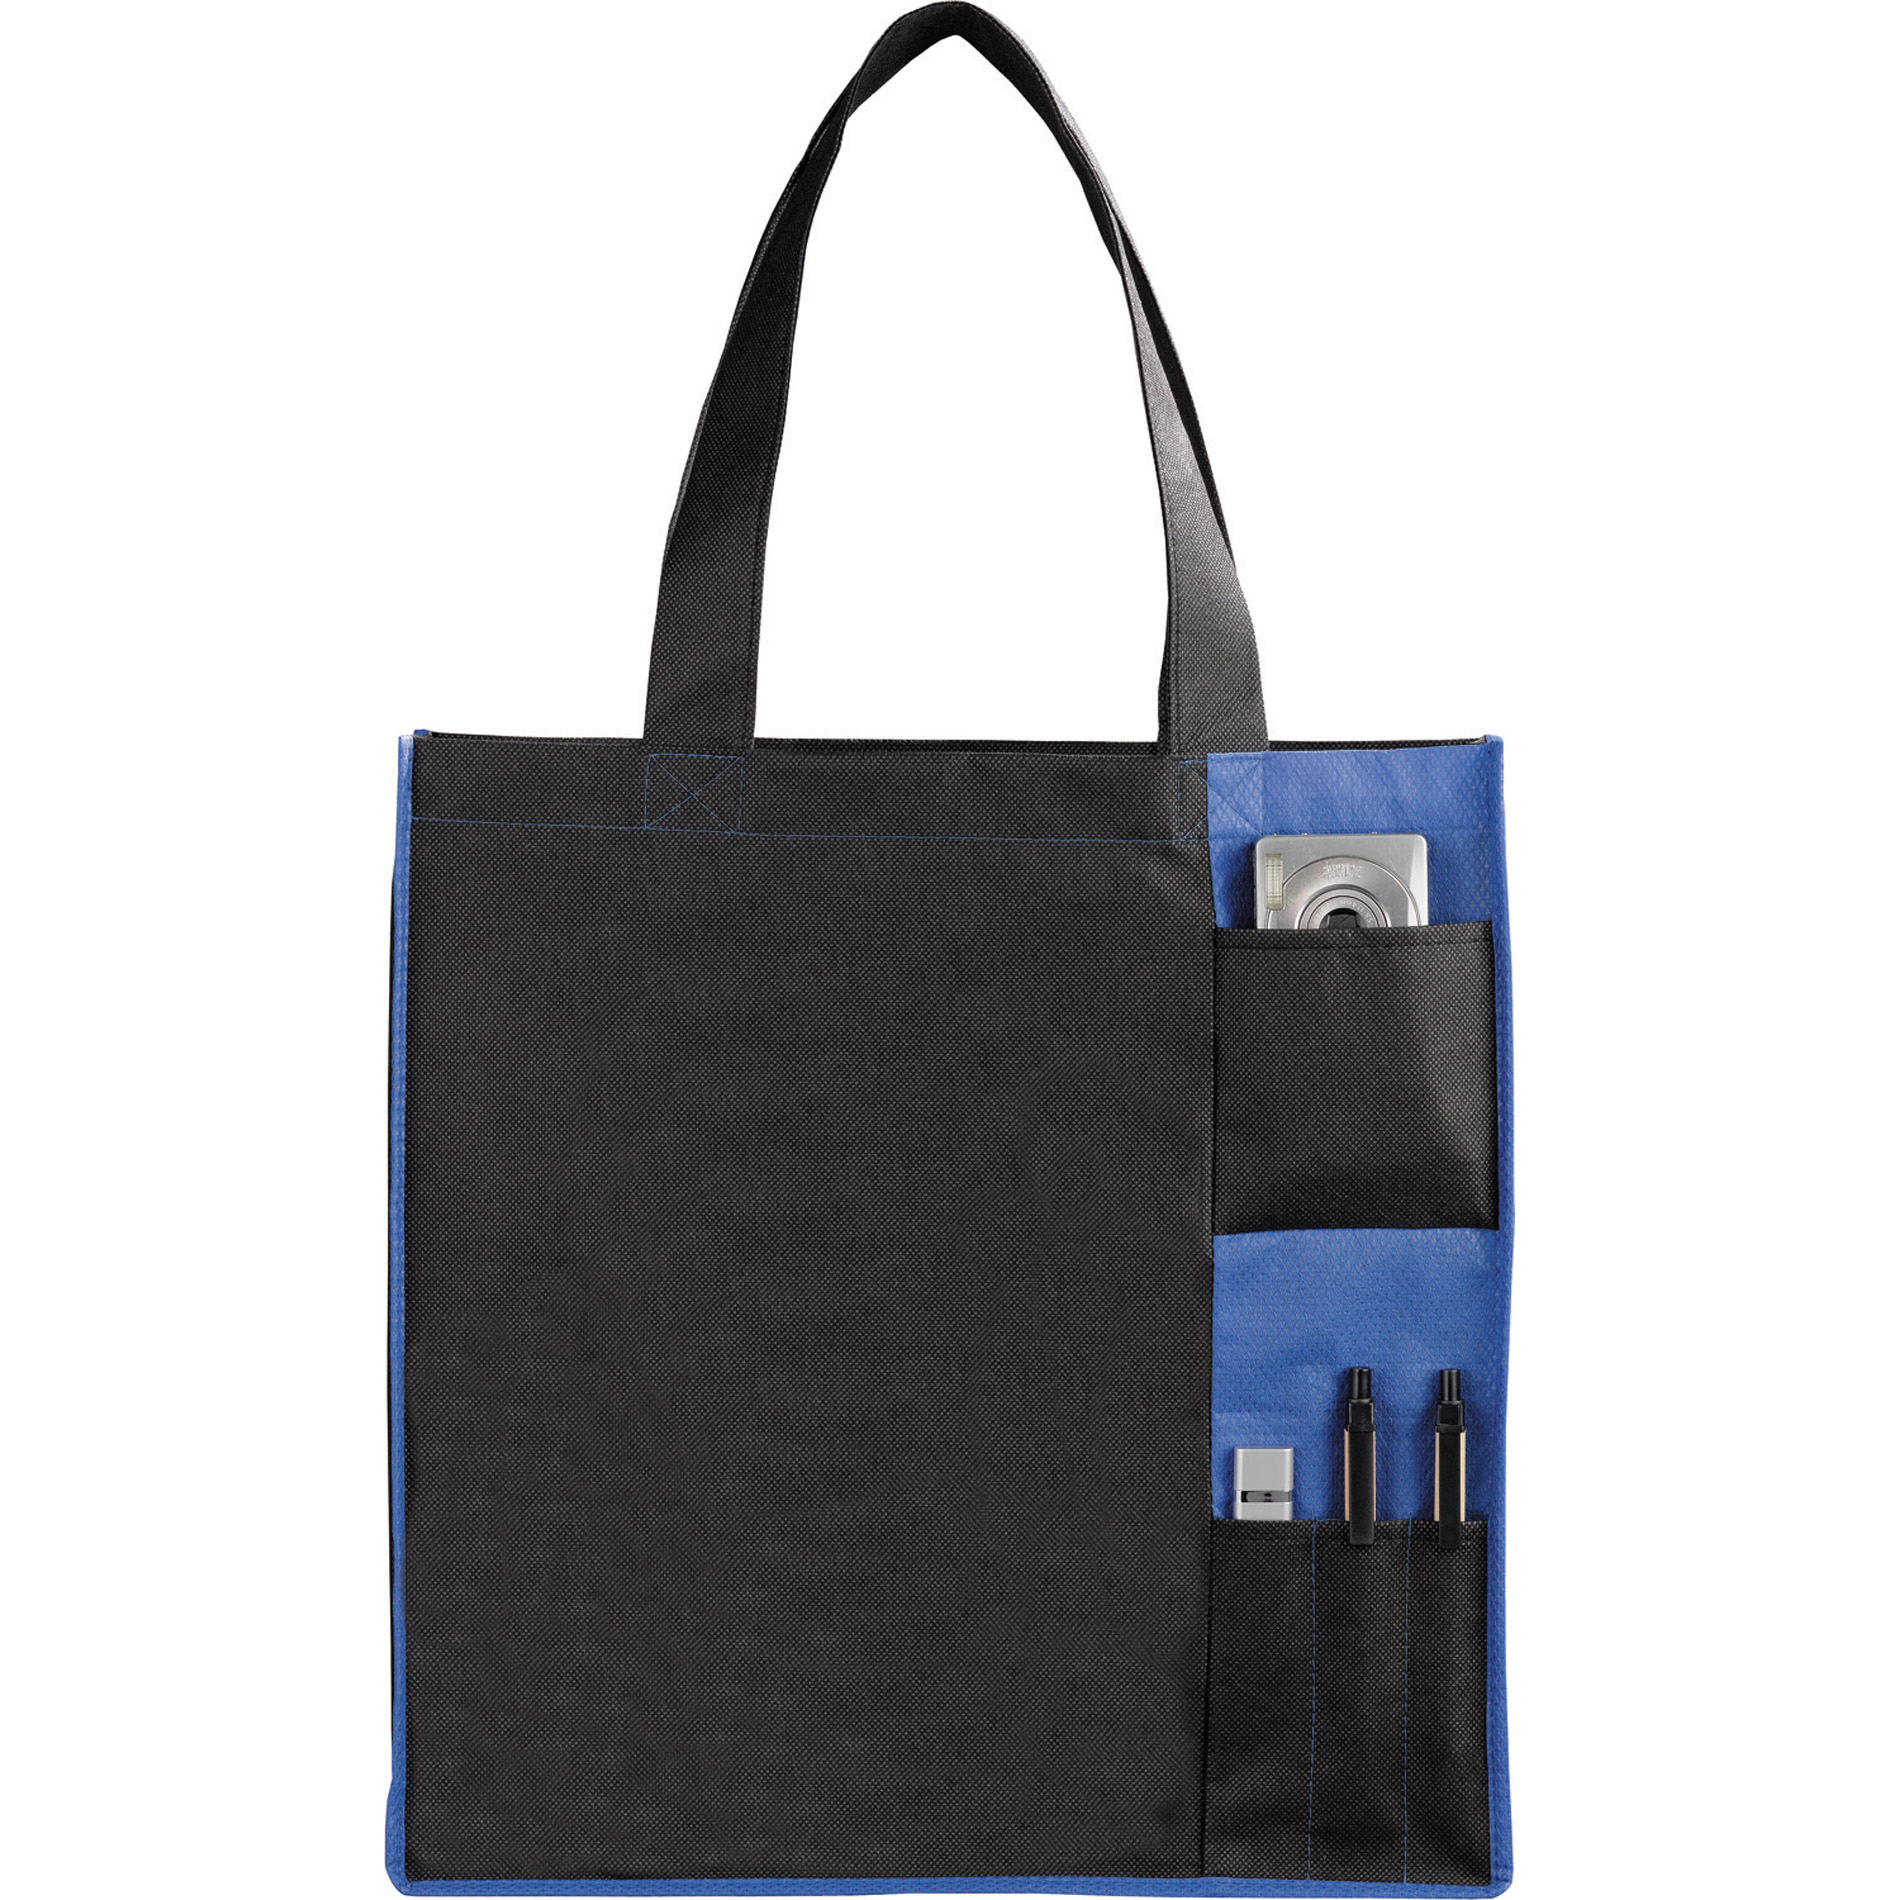 LEEDS 2150-21 - Non-Woven Pocket Convention Tote